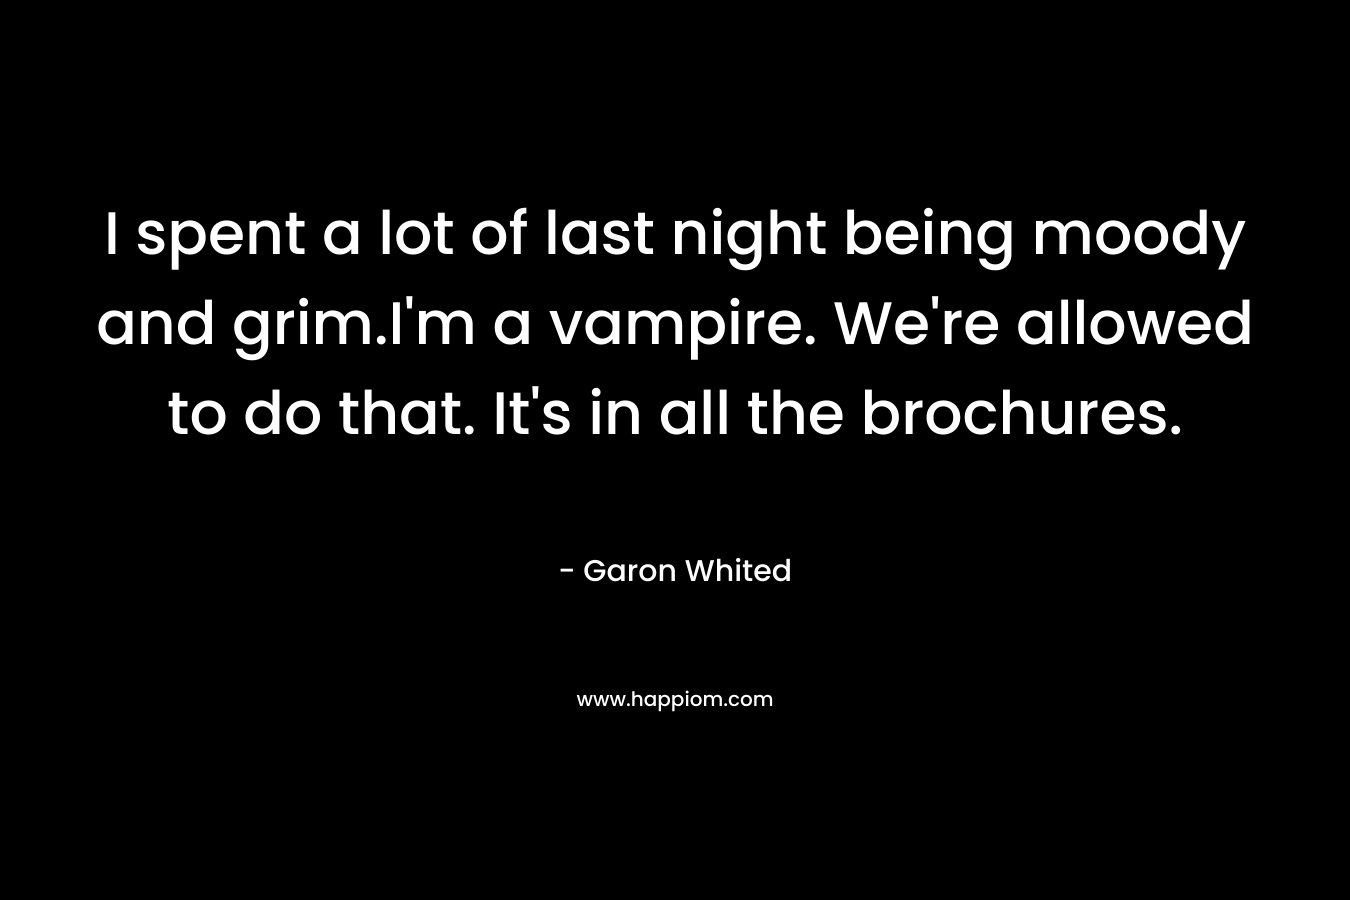 I spent a lot of last night being moody and grim.I'm a vampire. We're allowed to do that. It's in all the brochures.